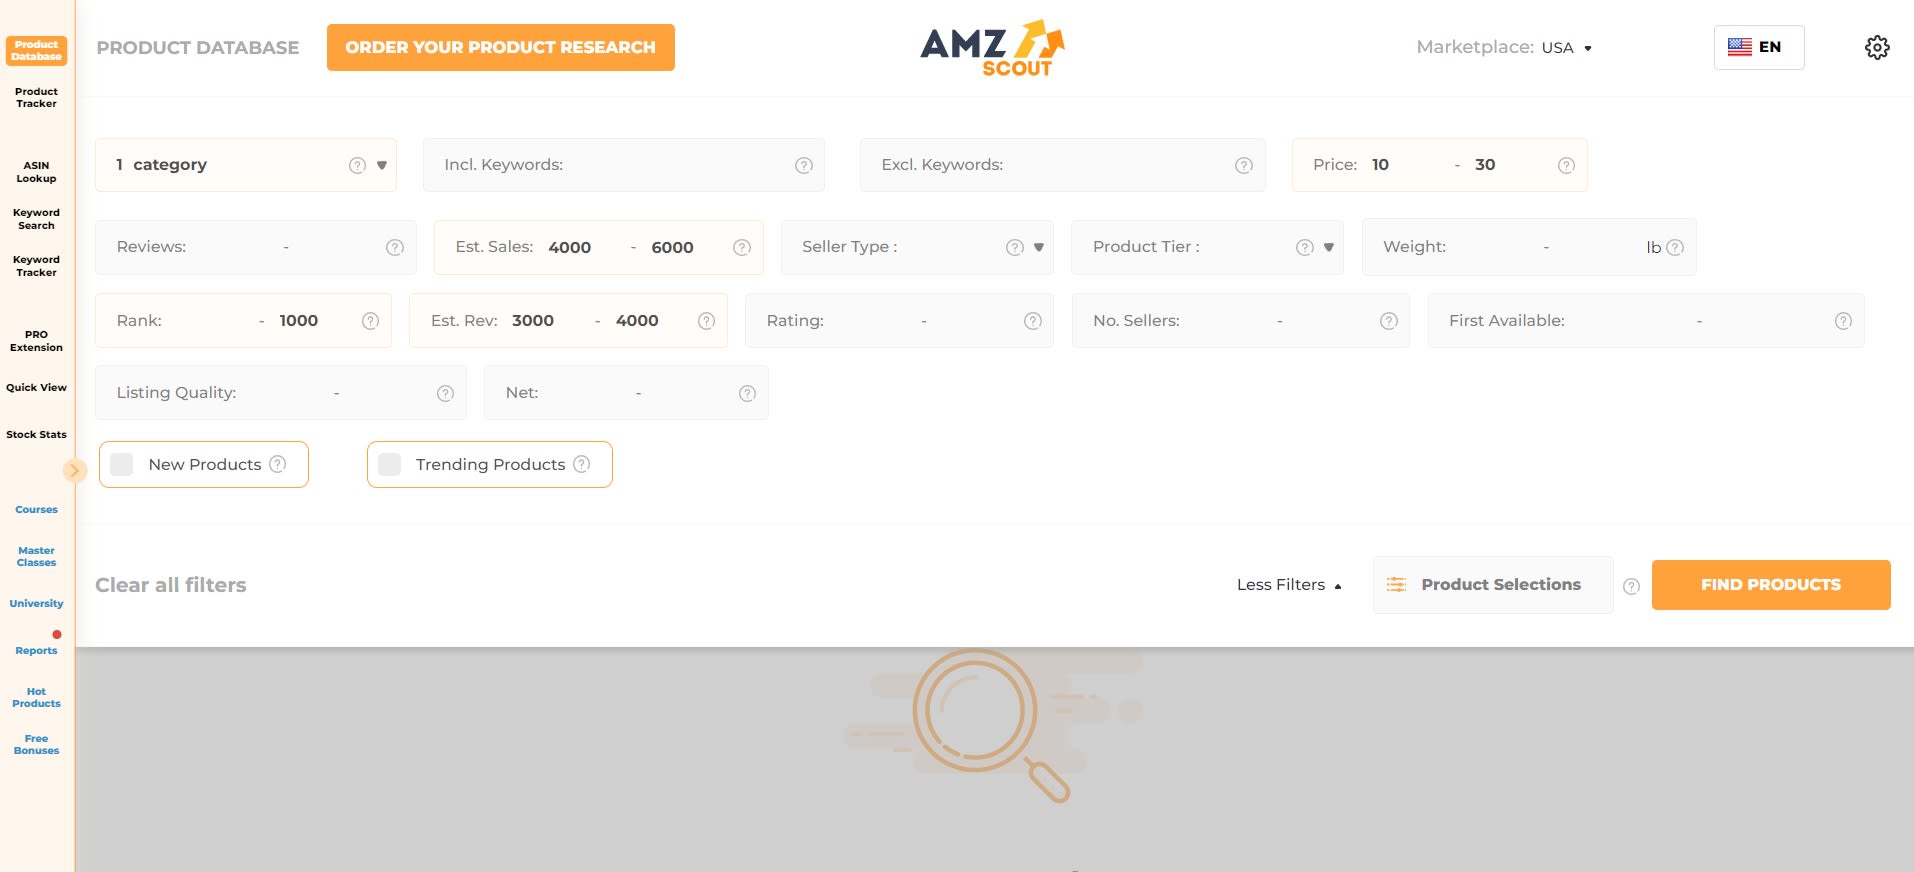 How to use AMZScout Product Database